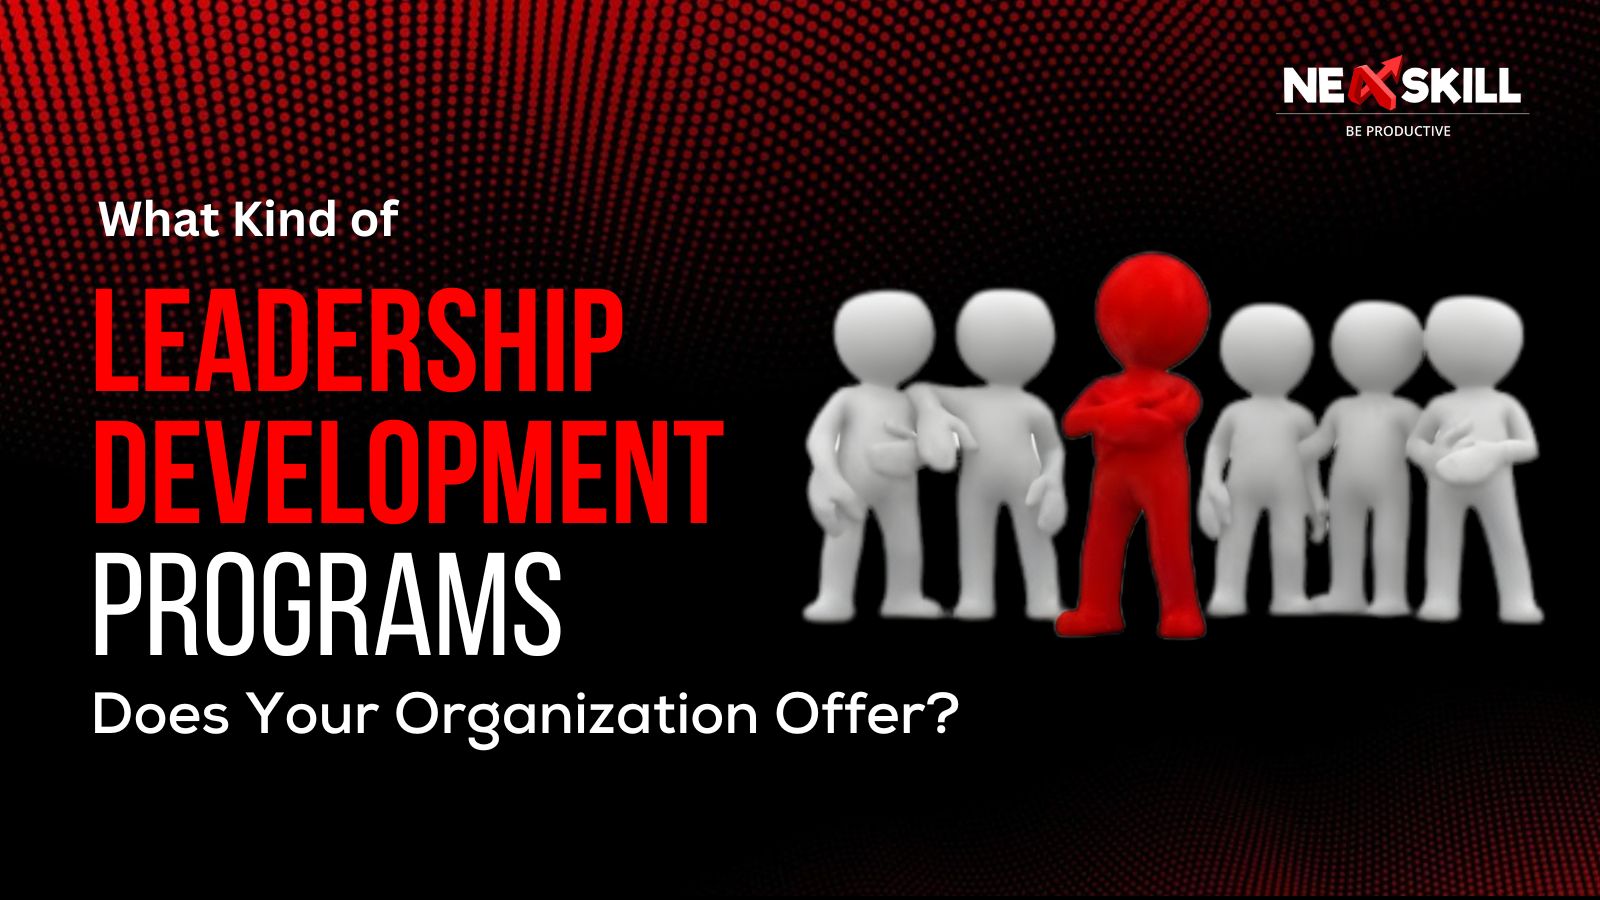 What Kind of Leadership Development Programs does Your Organization Offer?